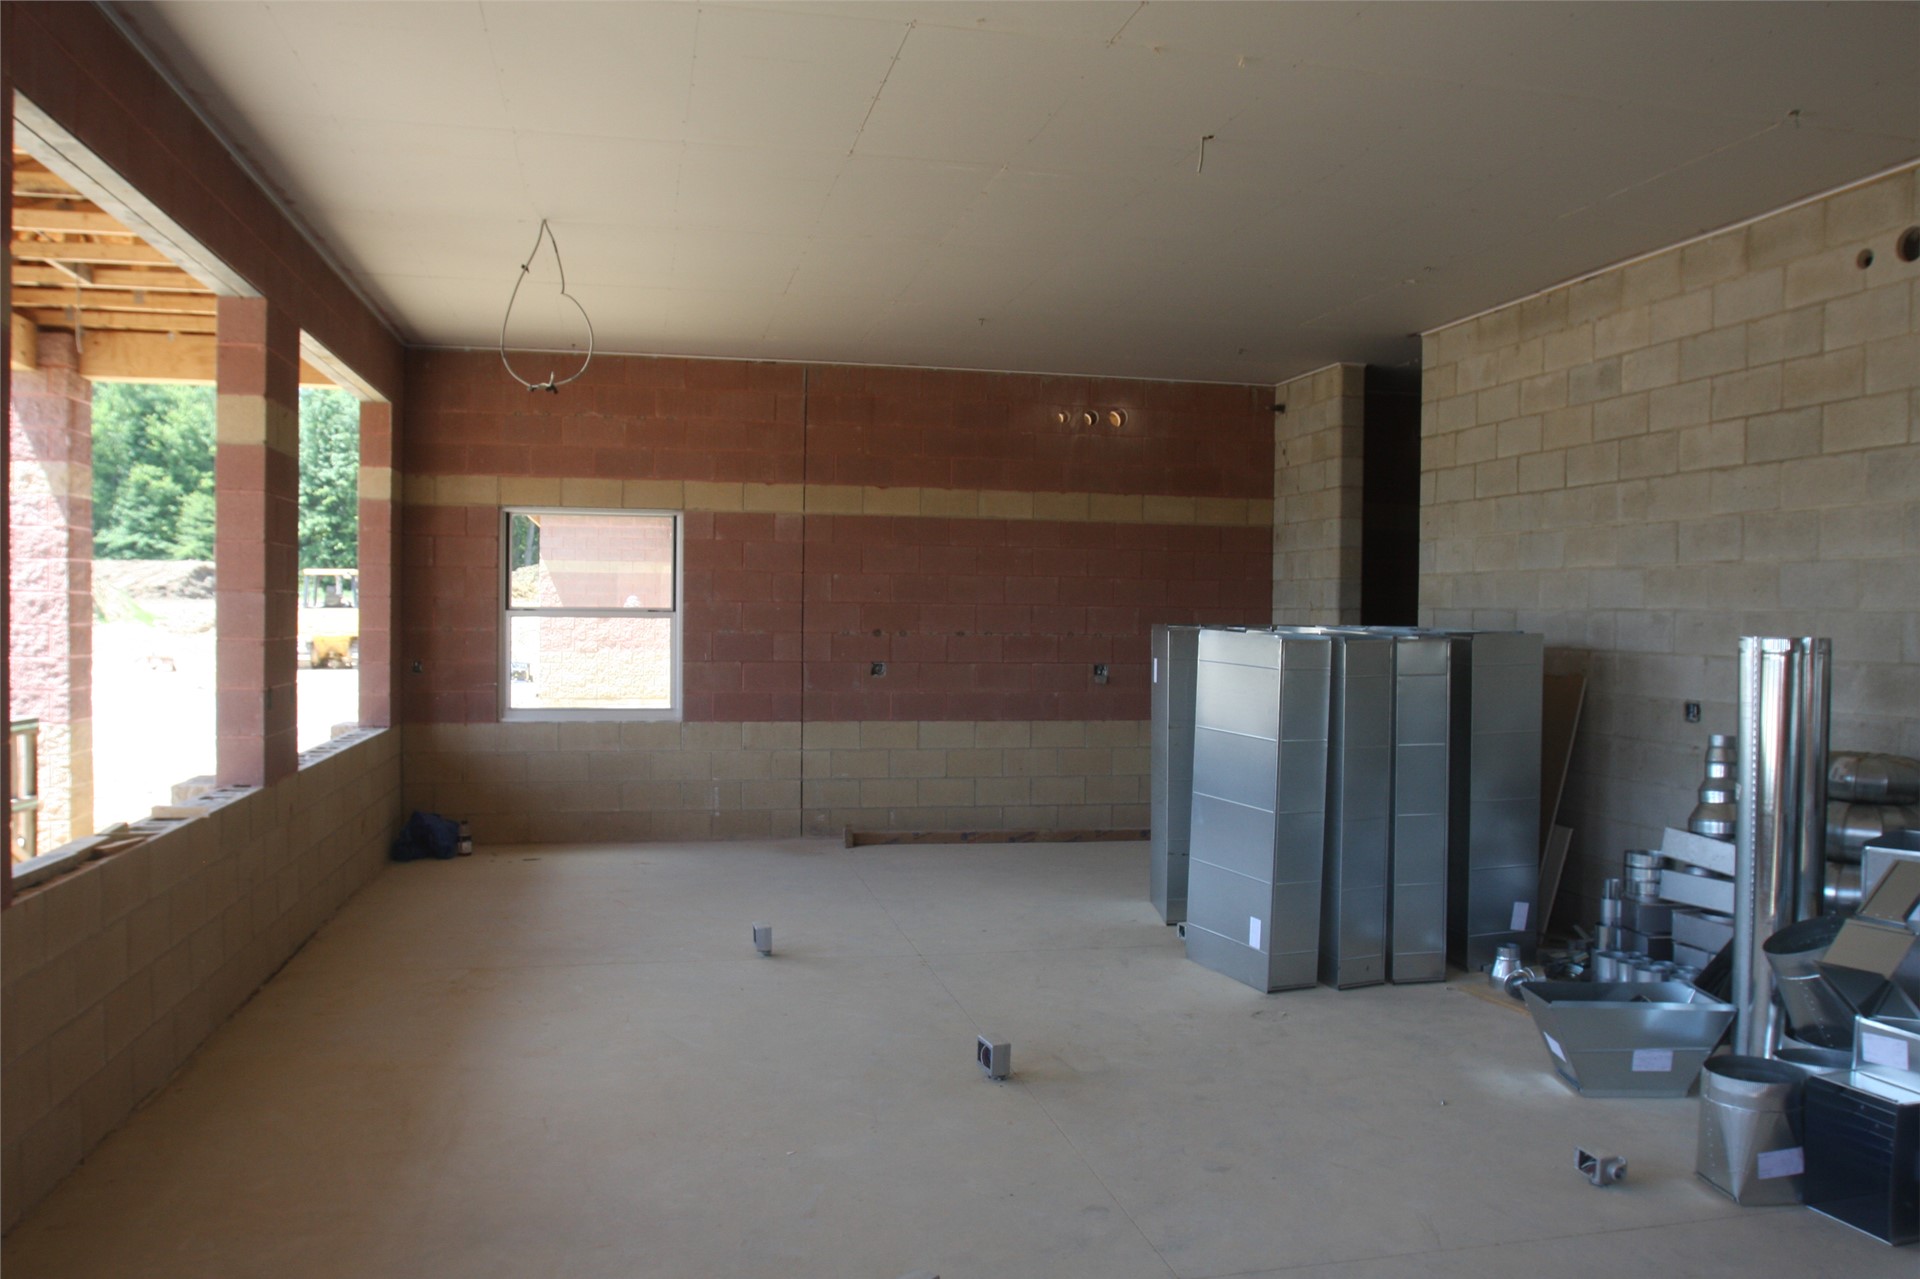 The concession stand awaits installation of venting and utilities